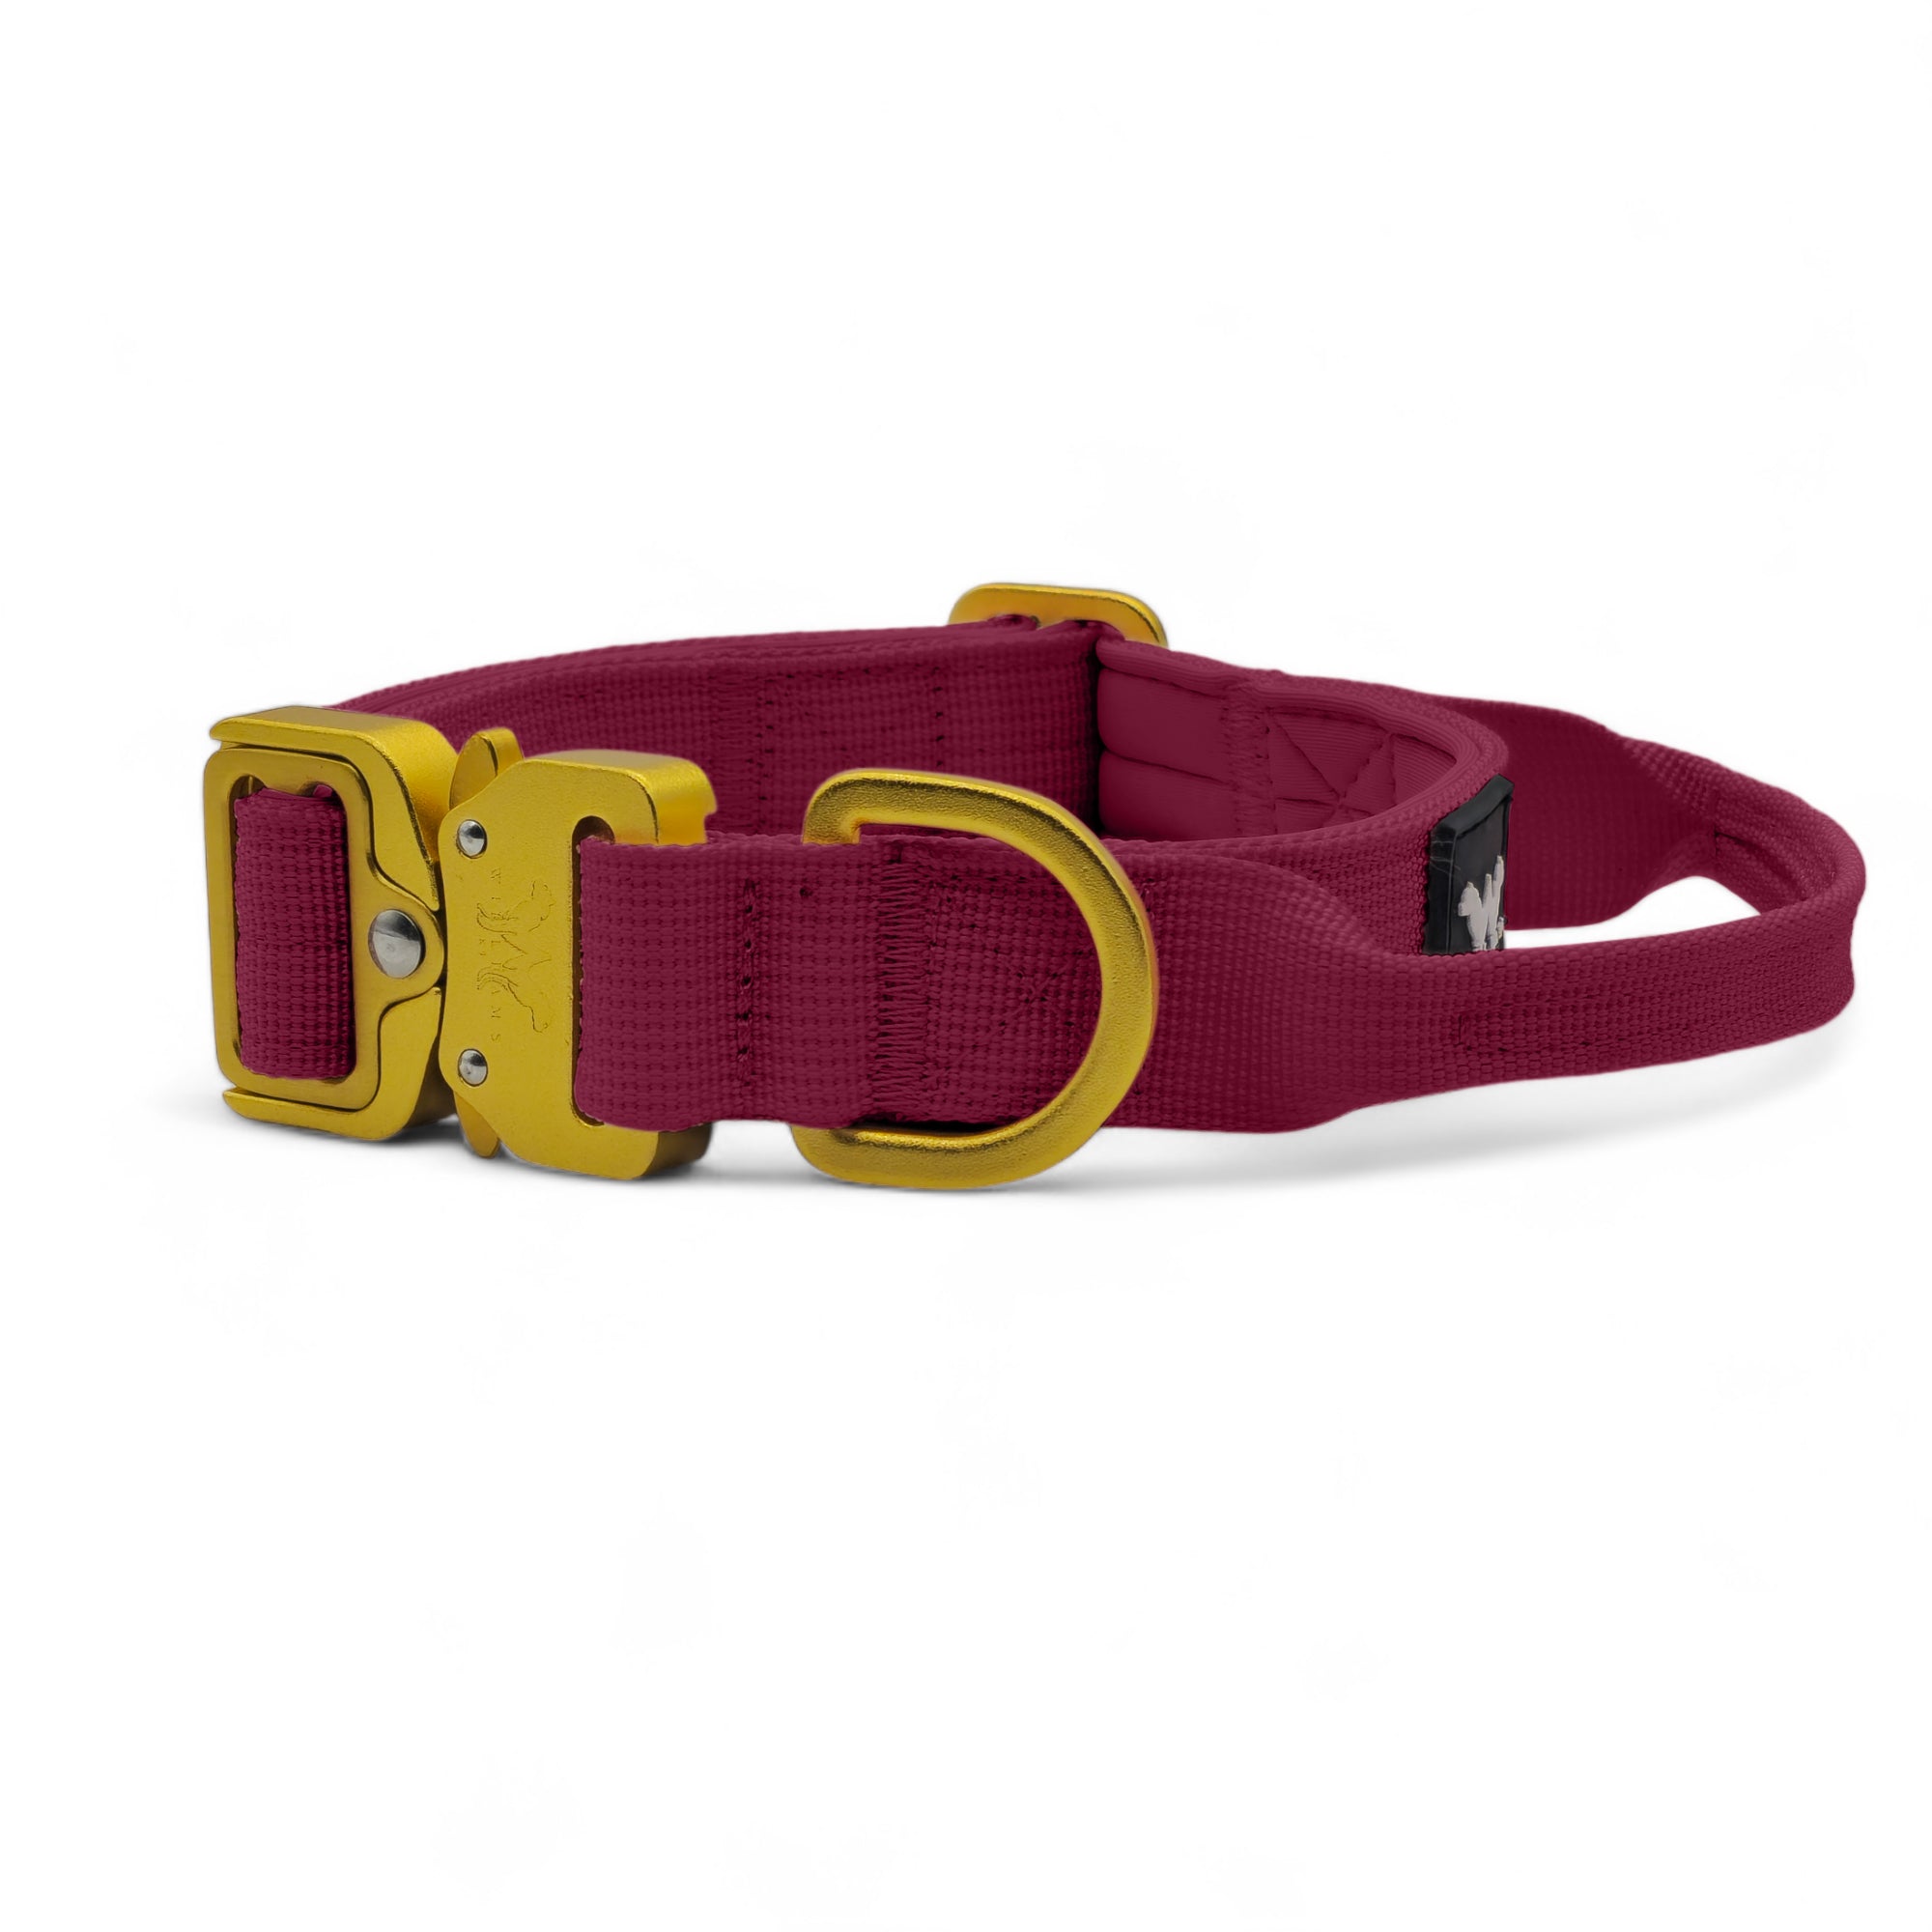 Light Tactical Collar 2.5CM Cherry Red | Triple Stitched Nylon Lightweight Gold Aluminium Buckle + D Ring Adjustable Collar With Handle